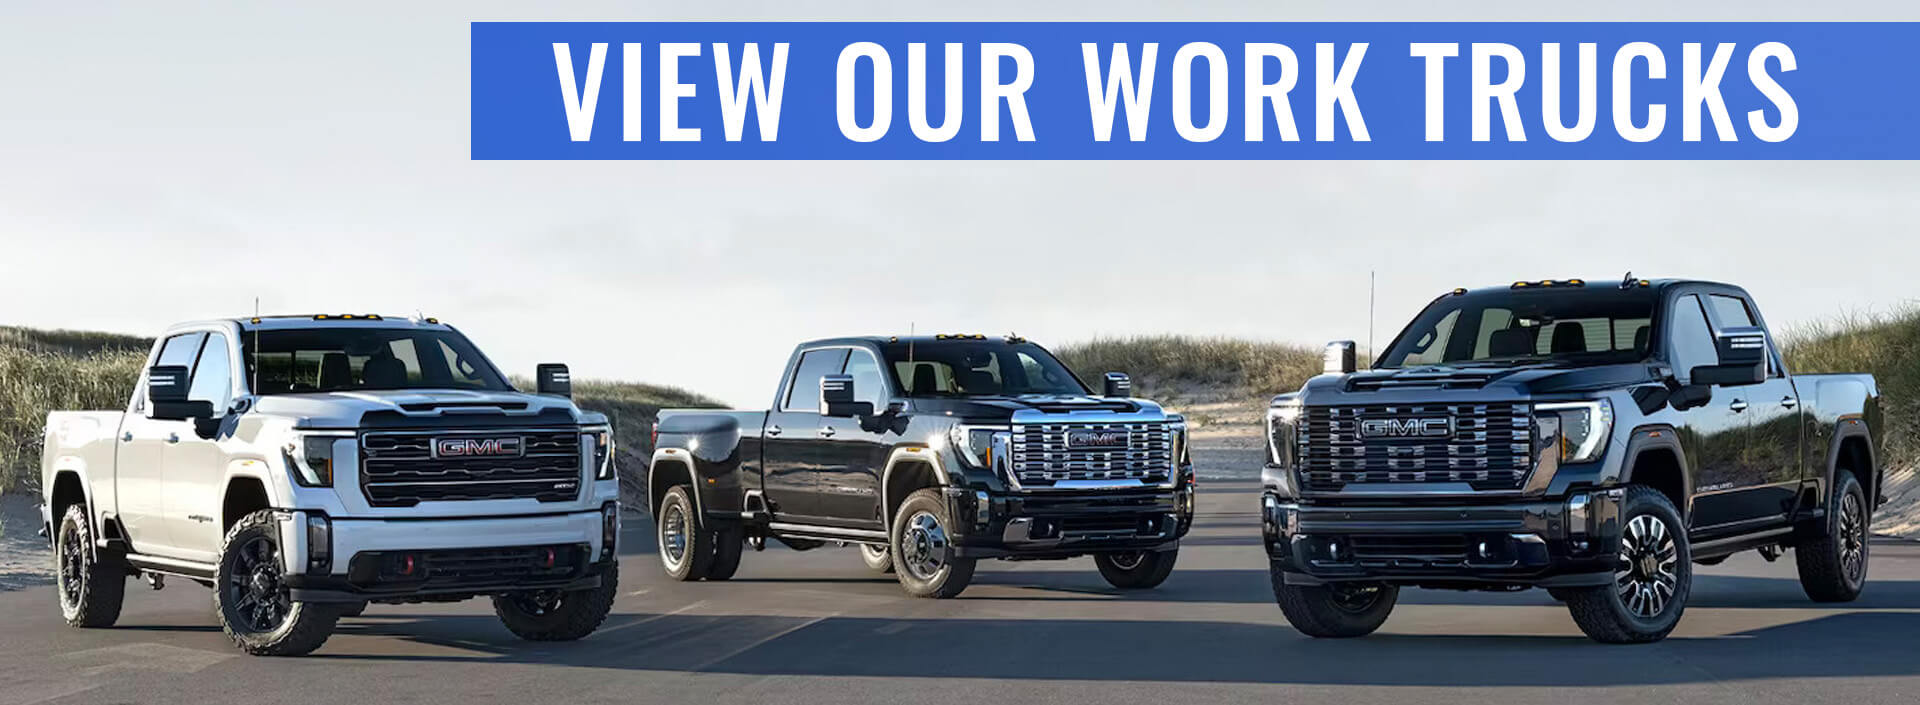 View Our Work Trucks 